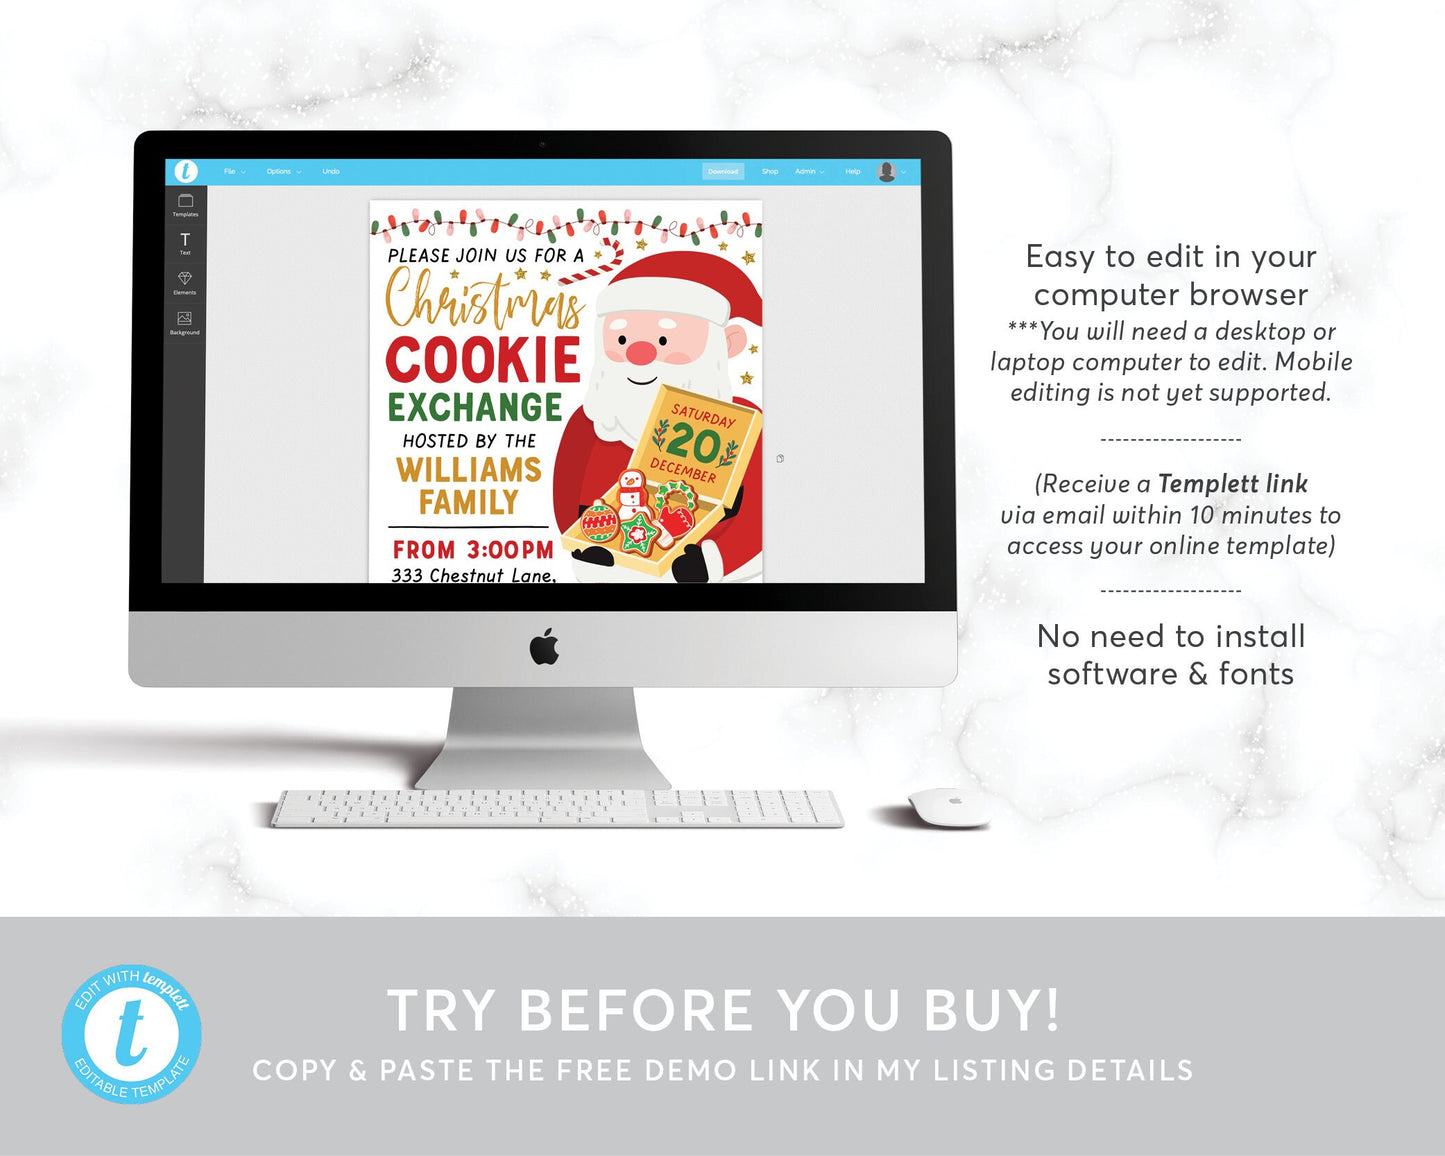 Christmas Cookie Exchange Invitation Editable Template, Xmas Cookie Swap Party Invite, Baking Party Holiday Exchange Cookie Decorating